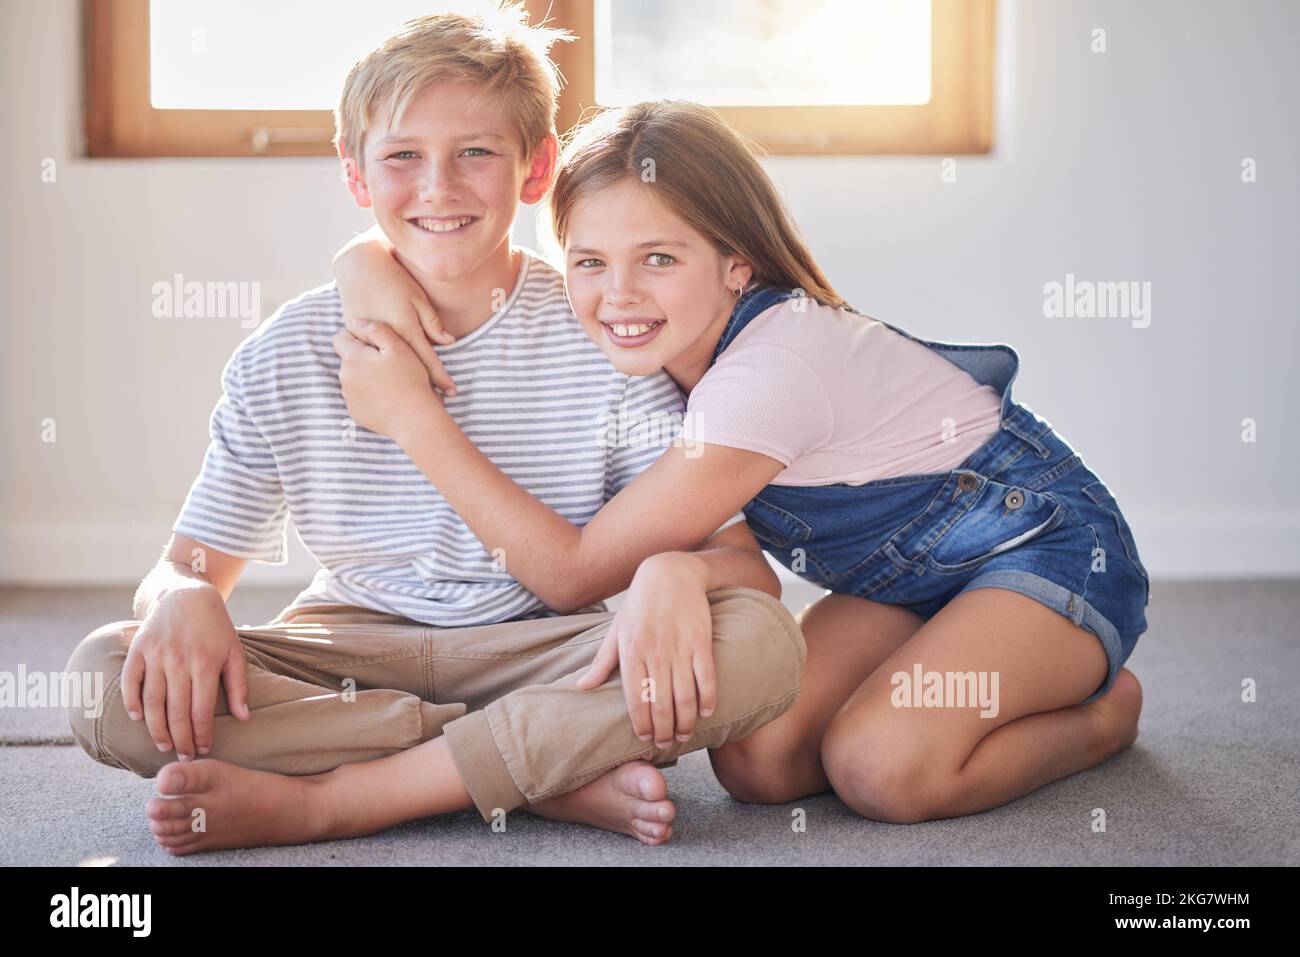 Home, kids portrait and hug of siblings or friends with youth fun and happiness together. Girl and child bonding, smiling and hugging with young Stock Photo